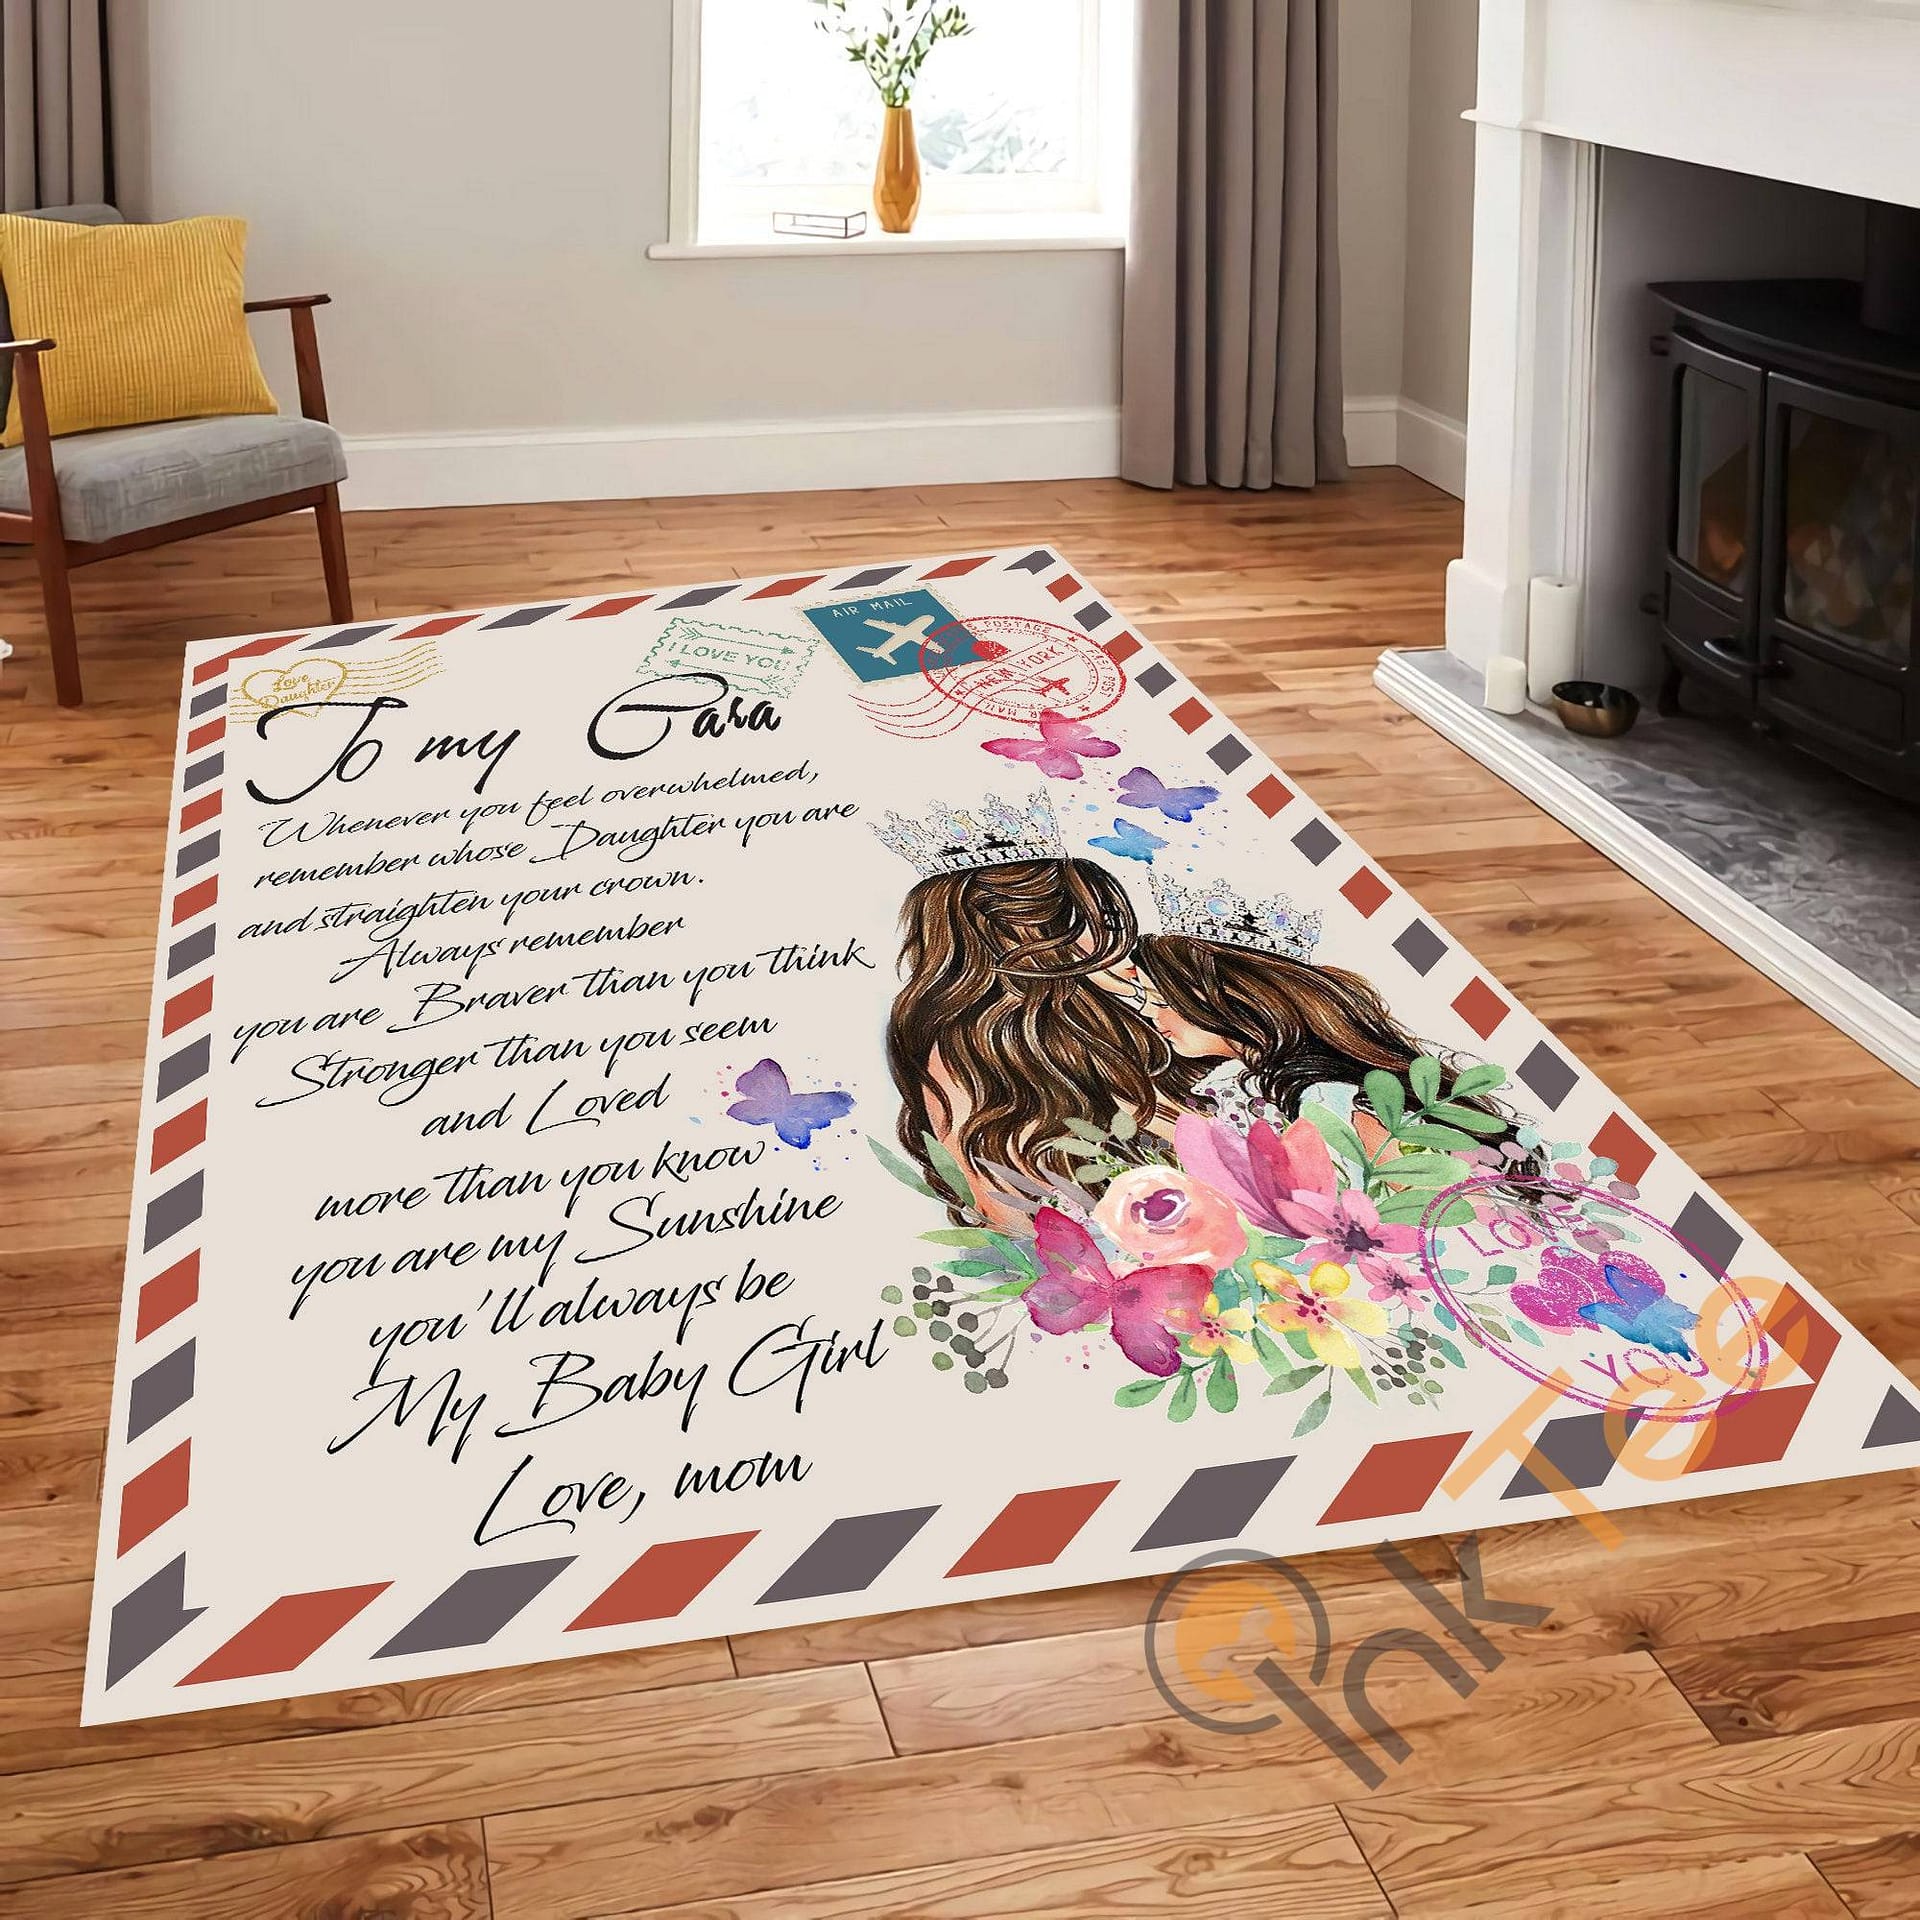 My Baby Girl Customized To Daughter Mom's Letter Personalized Gift Living Room Outdoor Carpet Rug